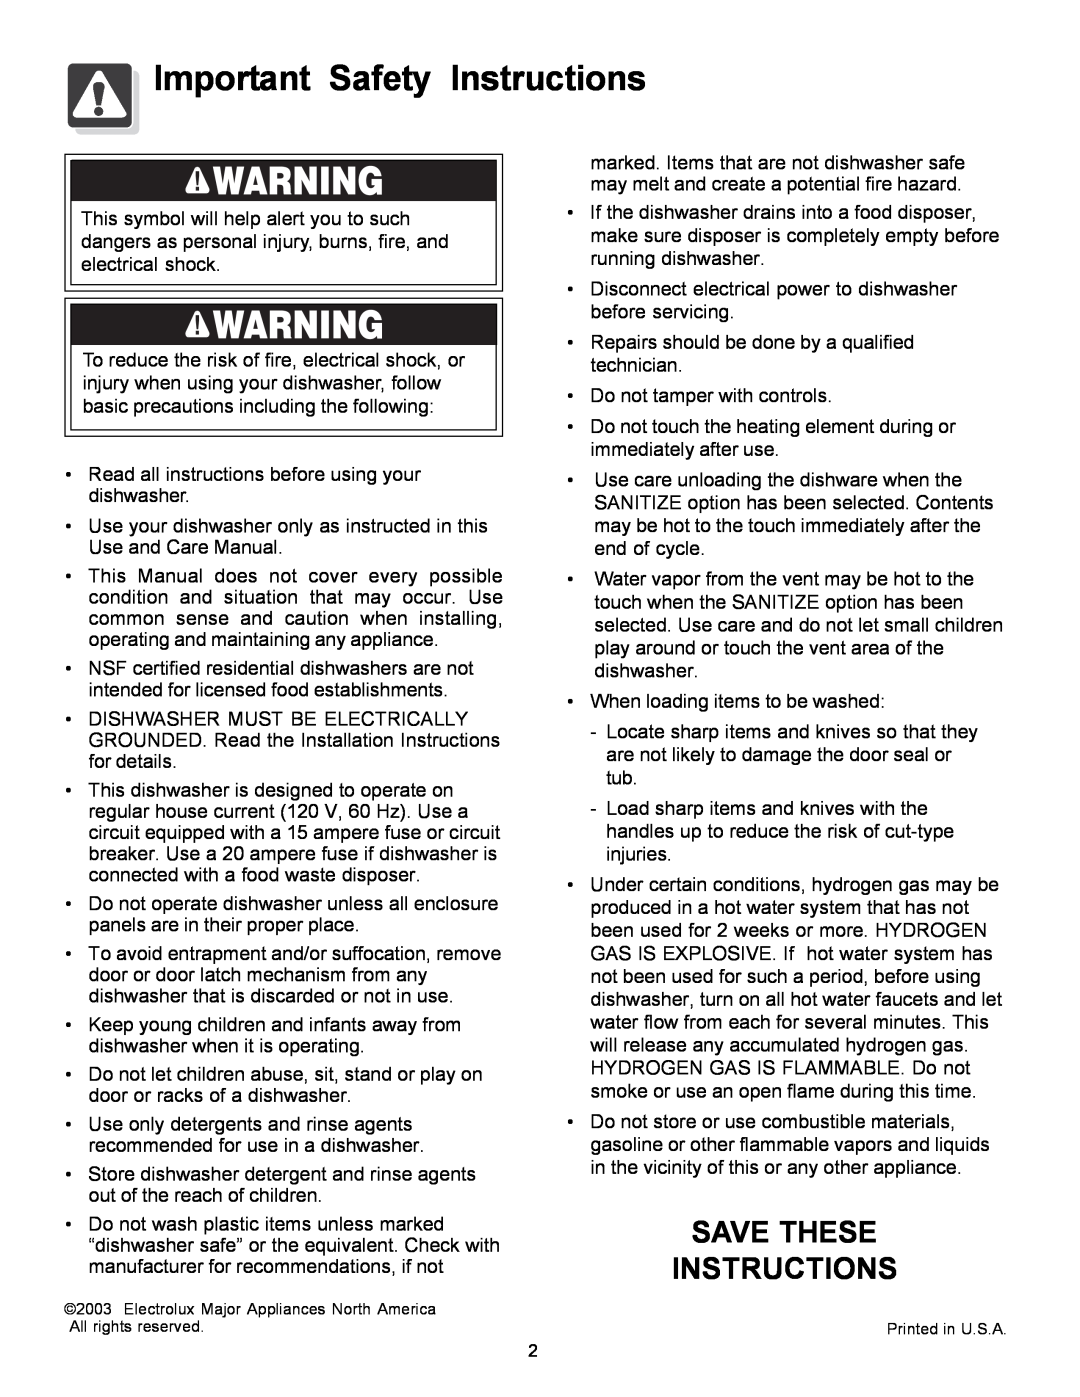 Frigidaire 1200 warranty Important Safety Instructions, Save These Instructions 